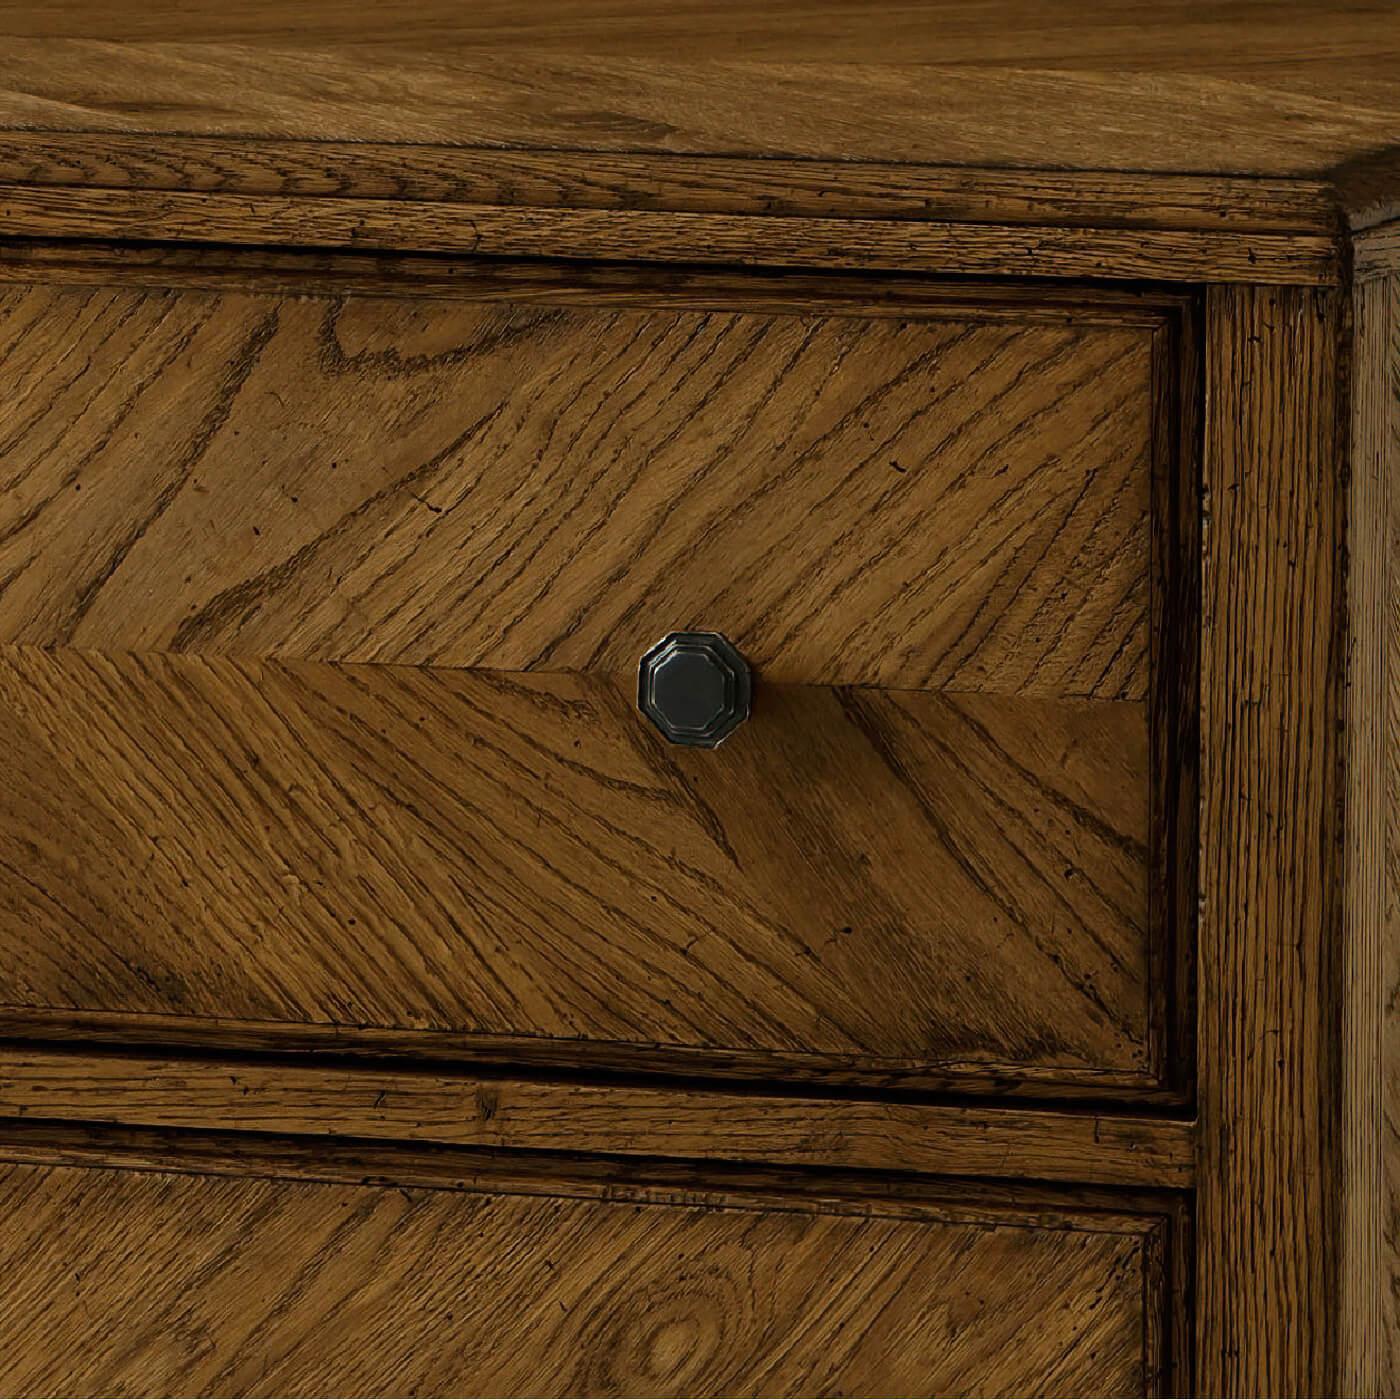 A dark rustic chest of drawers crafted with rustic oak. It has a mirrored herringbone oak parquetry design with three oak-sculptured drawers accented with Verde Bronze finished knobs and beautifully tapered oak legs.

Dimensions: 46